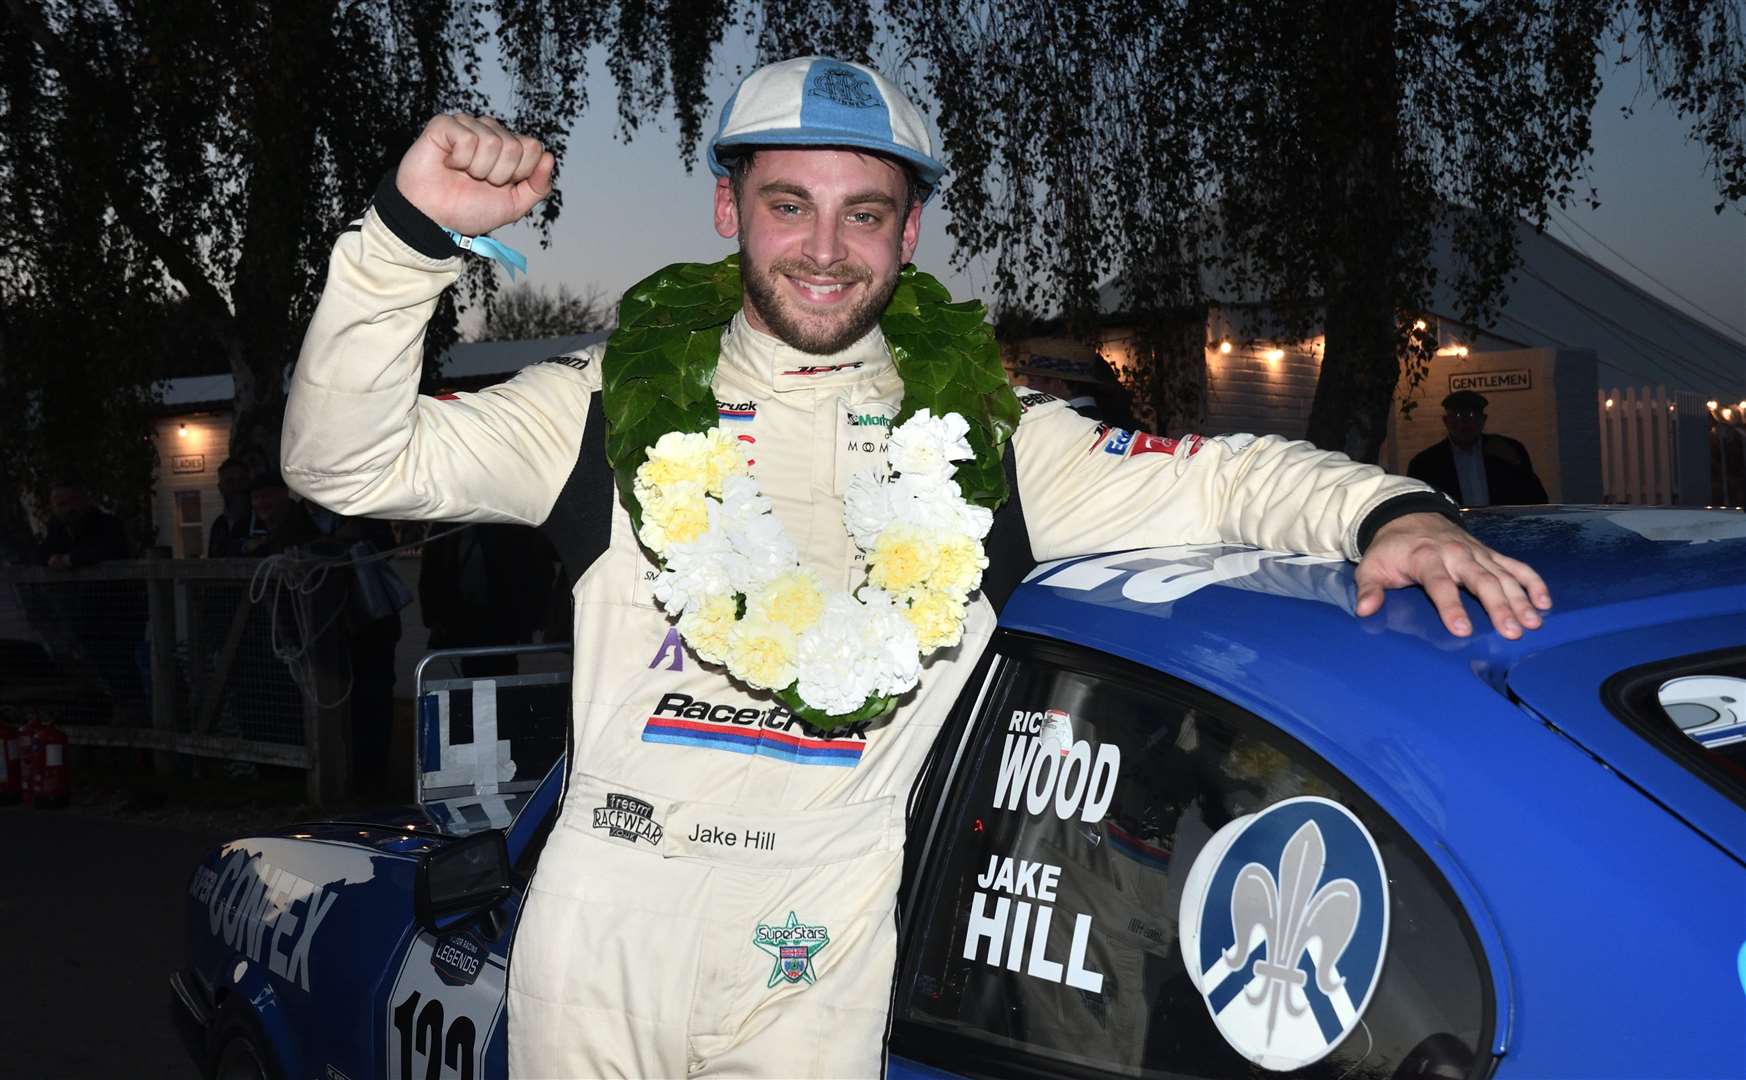 Quickly becoming a star of historic racing, Hill won the Gerry Marshall Trophy in a 1978 Ford Capri at the Goodwood Members' Meeting a week before the BTCC finale